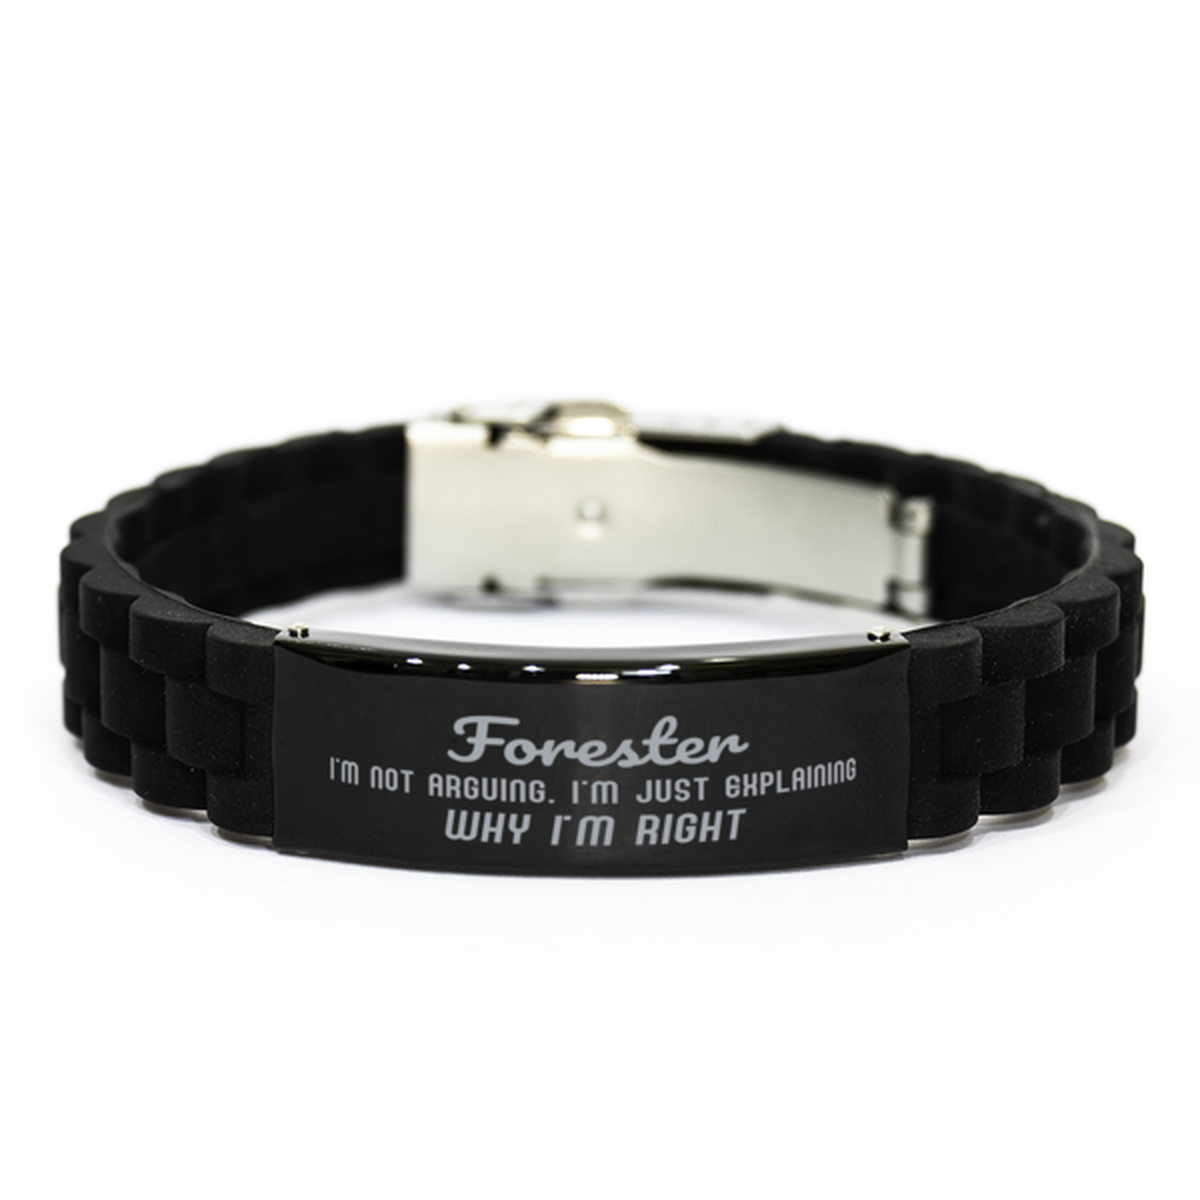 Forester I'm not Arguing. I'm Just Explaining Why I'm RIGHT Black Glidelock Clasp Bracelet, Funny Saying Quote Forester Gifts For Forester Graduation Birthday Christmas Gifts for Men Women Coworker